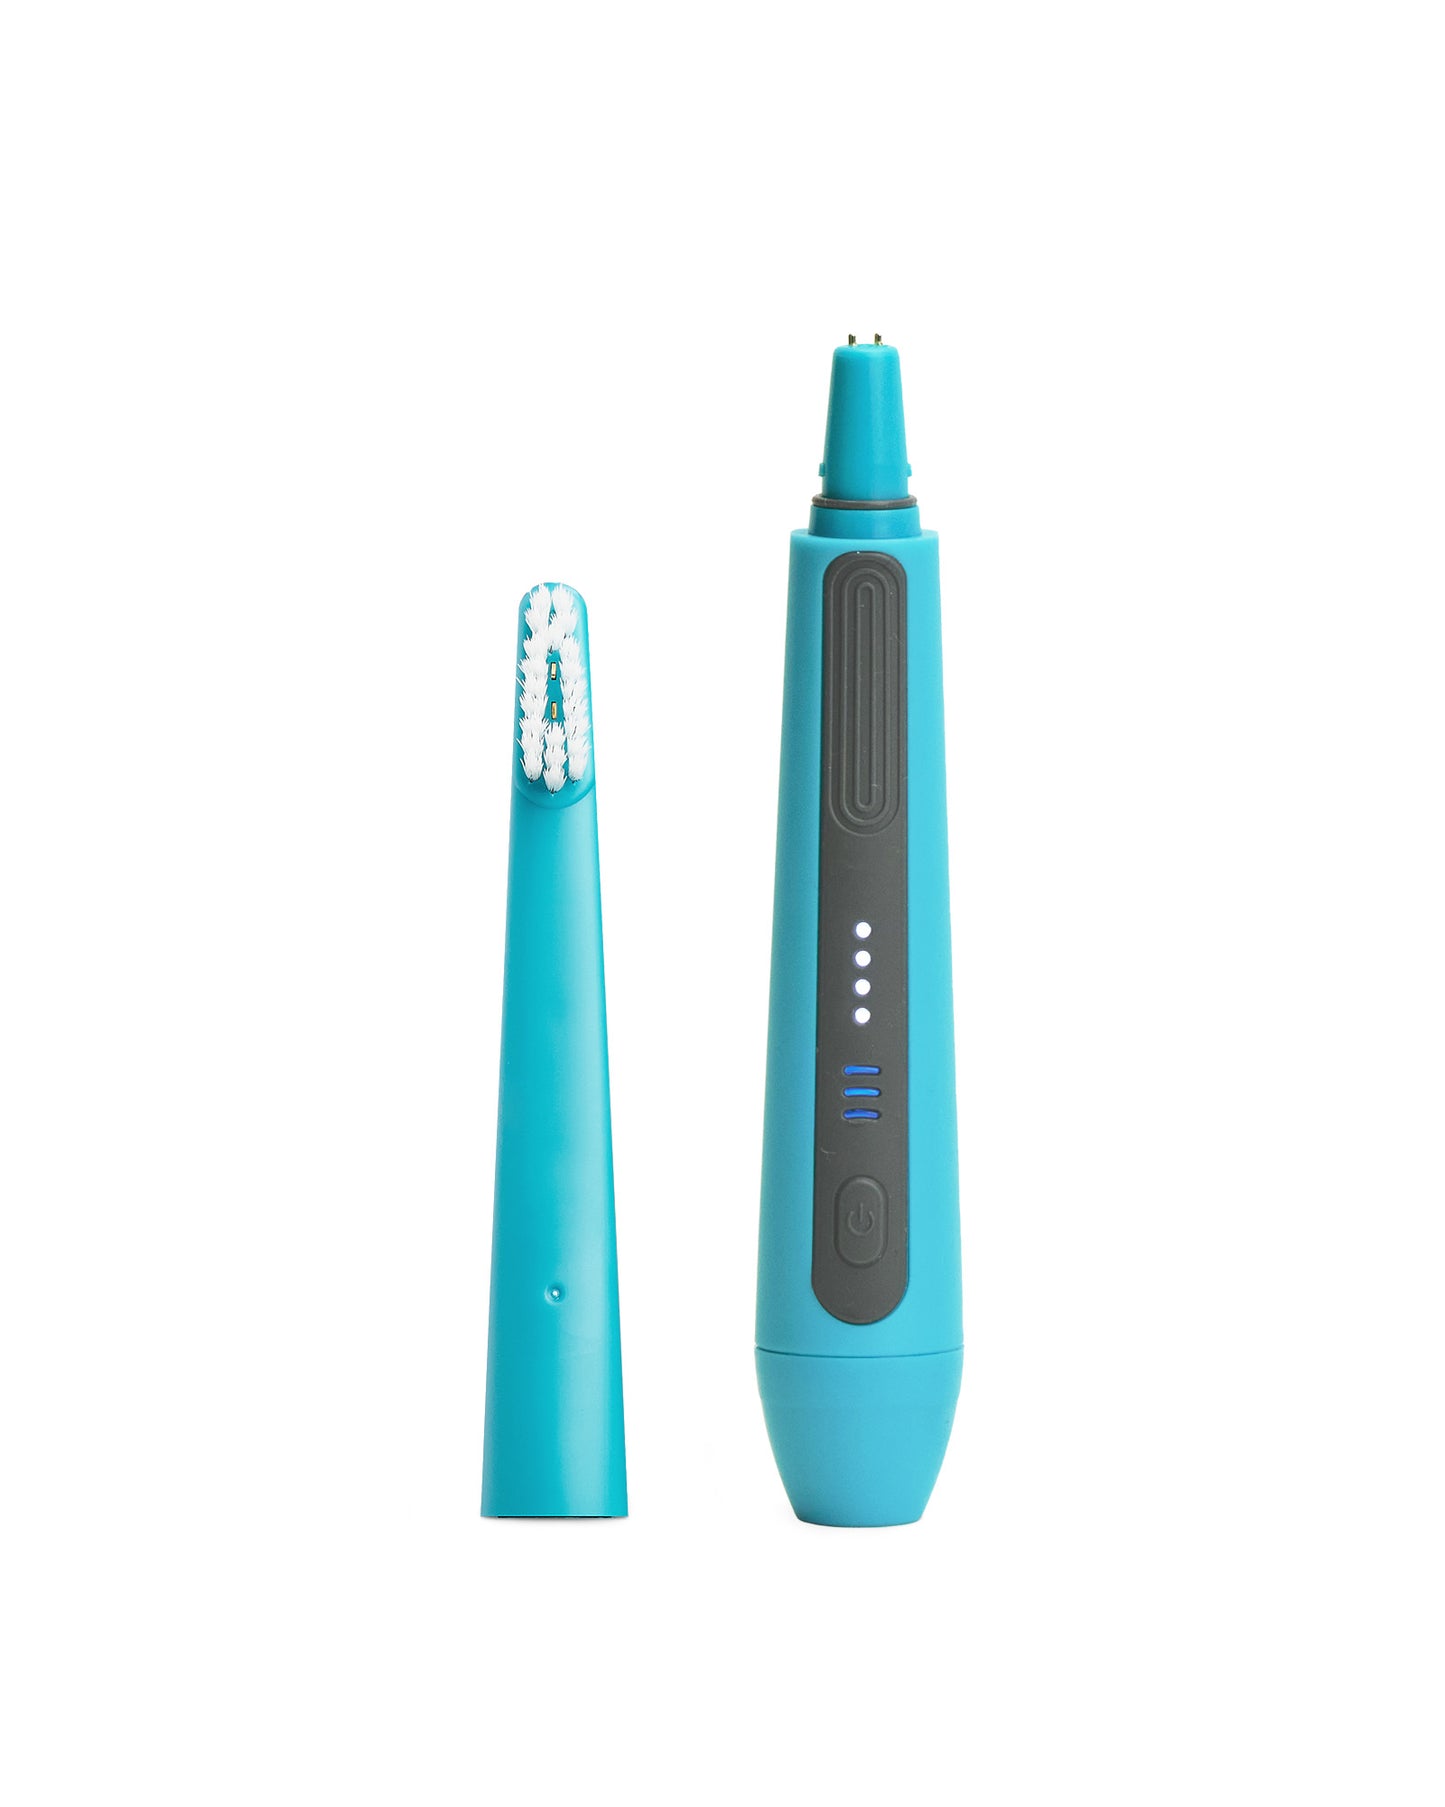 A replacement brush head for the Oreze toothbrush in marine blue